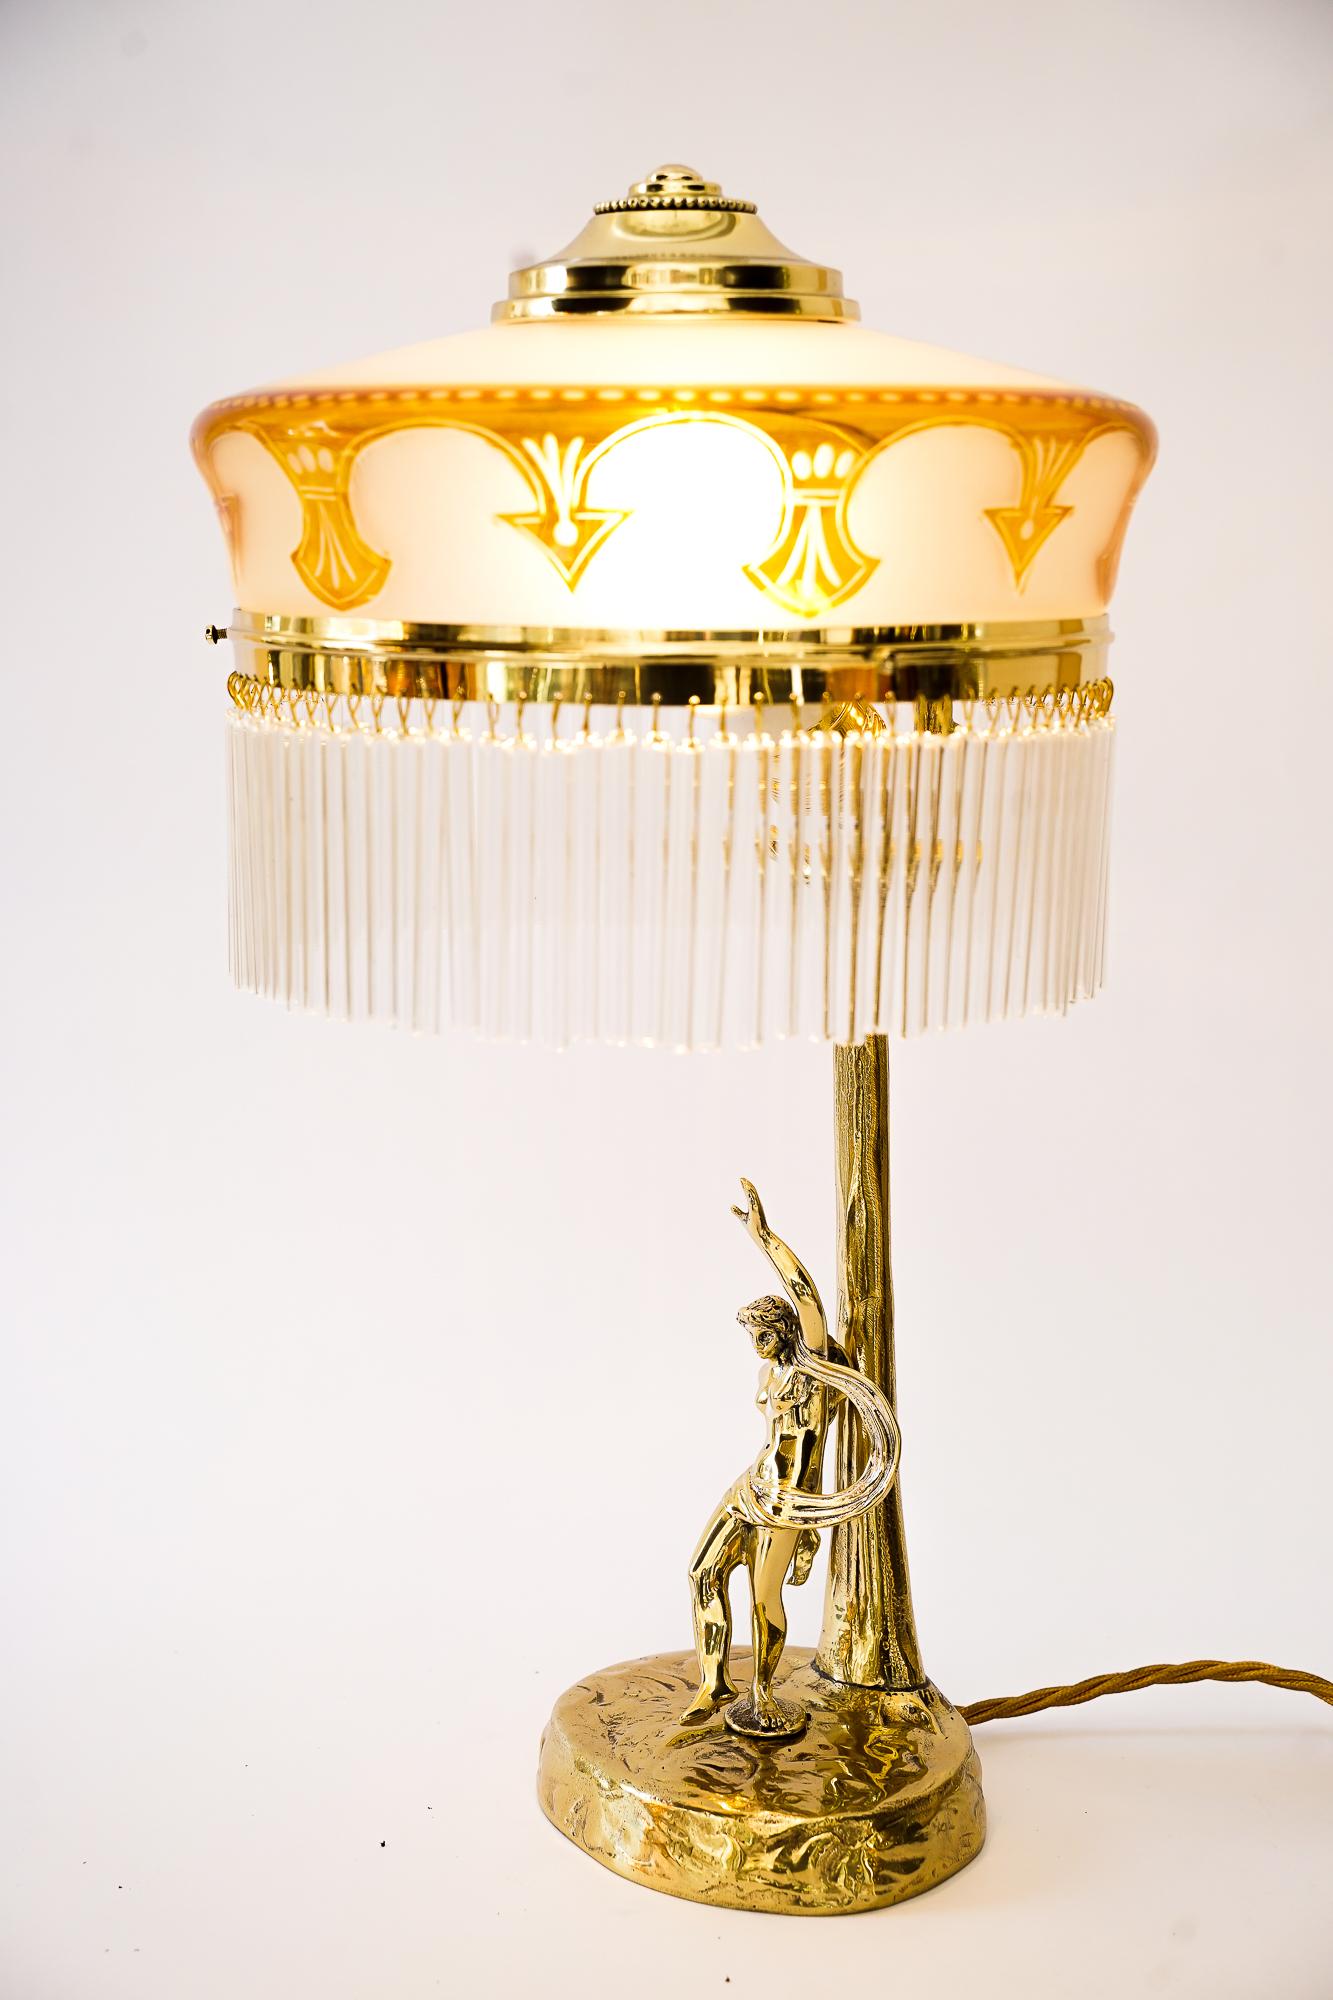 Jugendstil Table Lamp with Original Antique Glass Shade, Vienna, Around 1910s For Sale 10